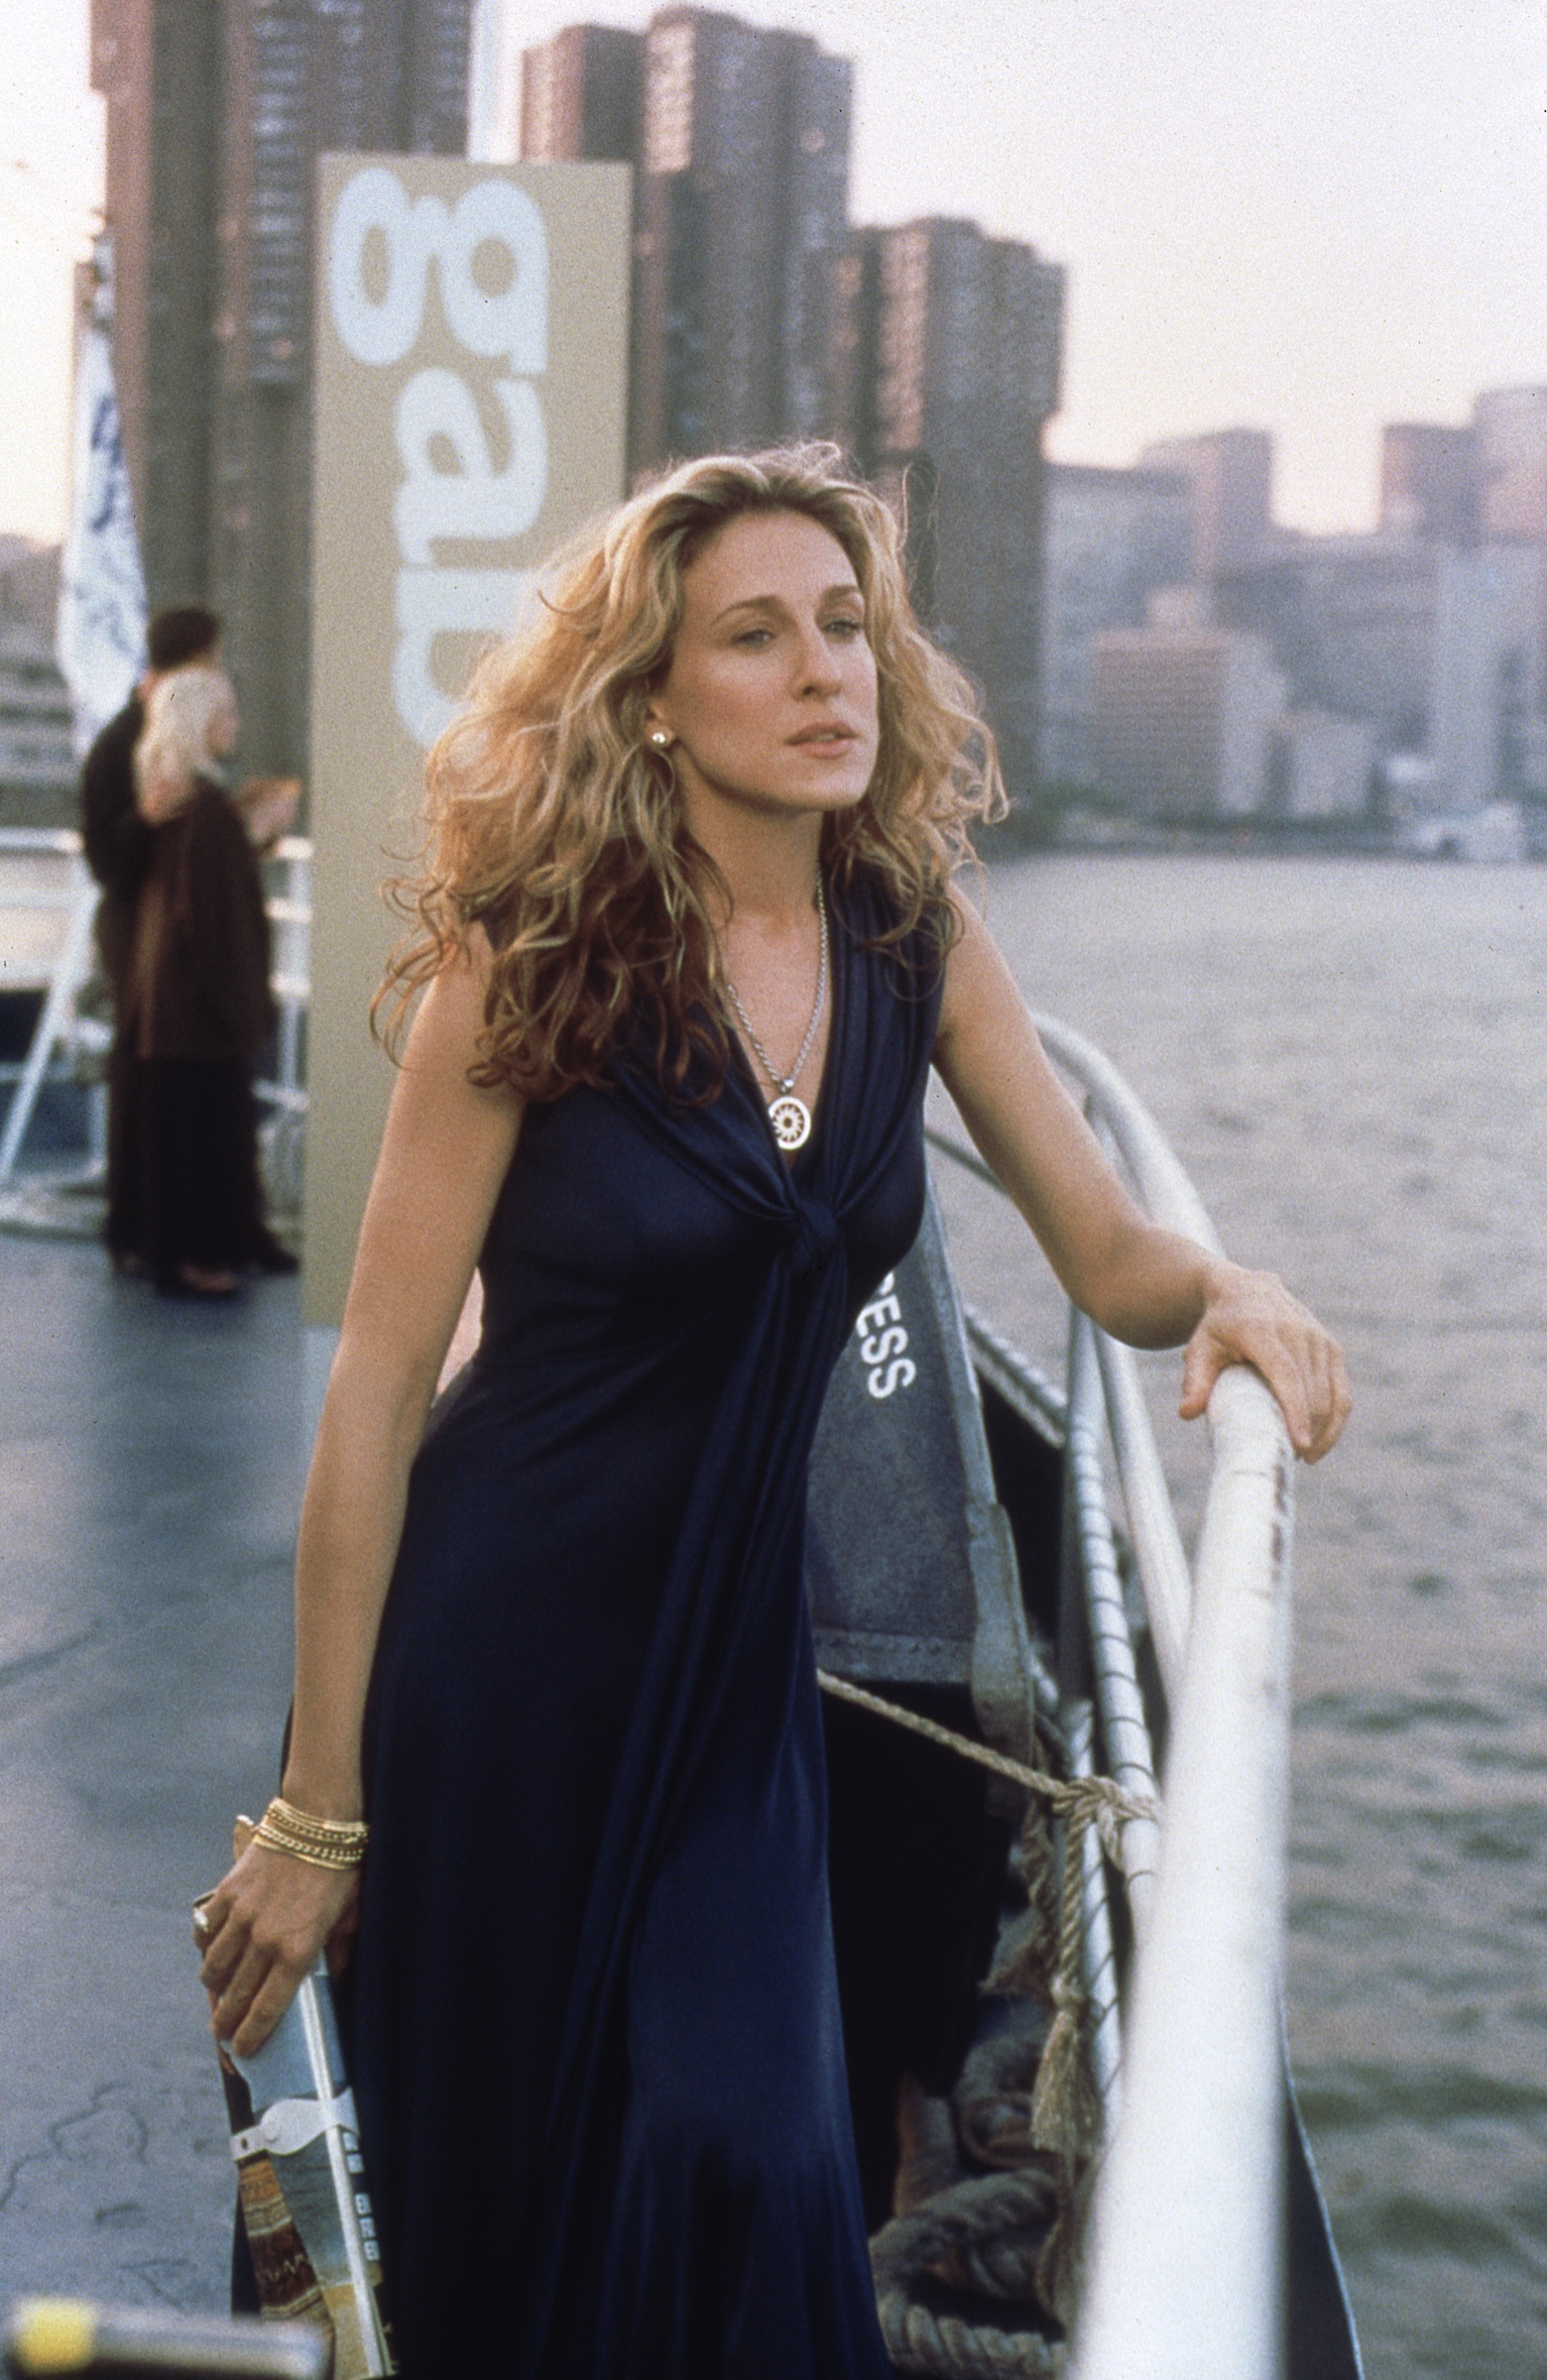 Sarah Jessica Parker on a boat for a scene in 'Sex and the City' season 3